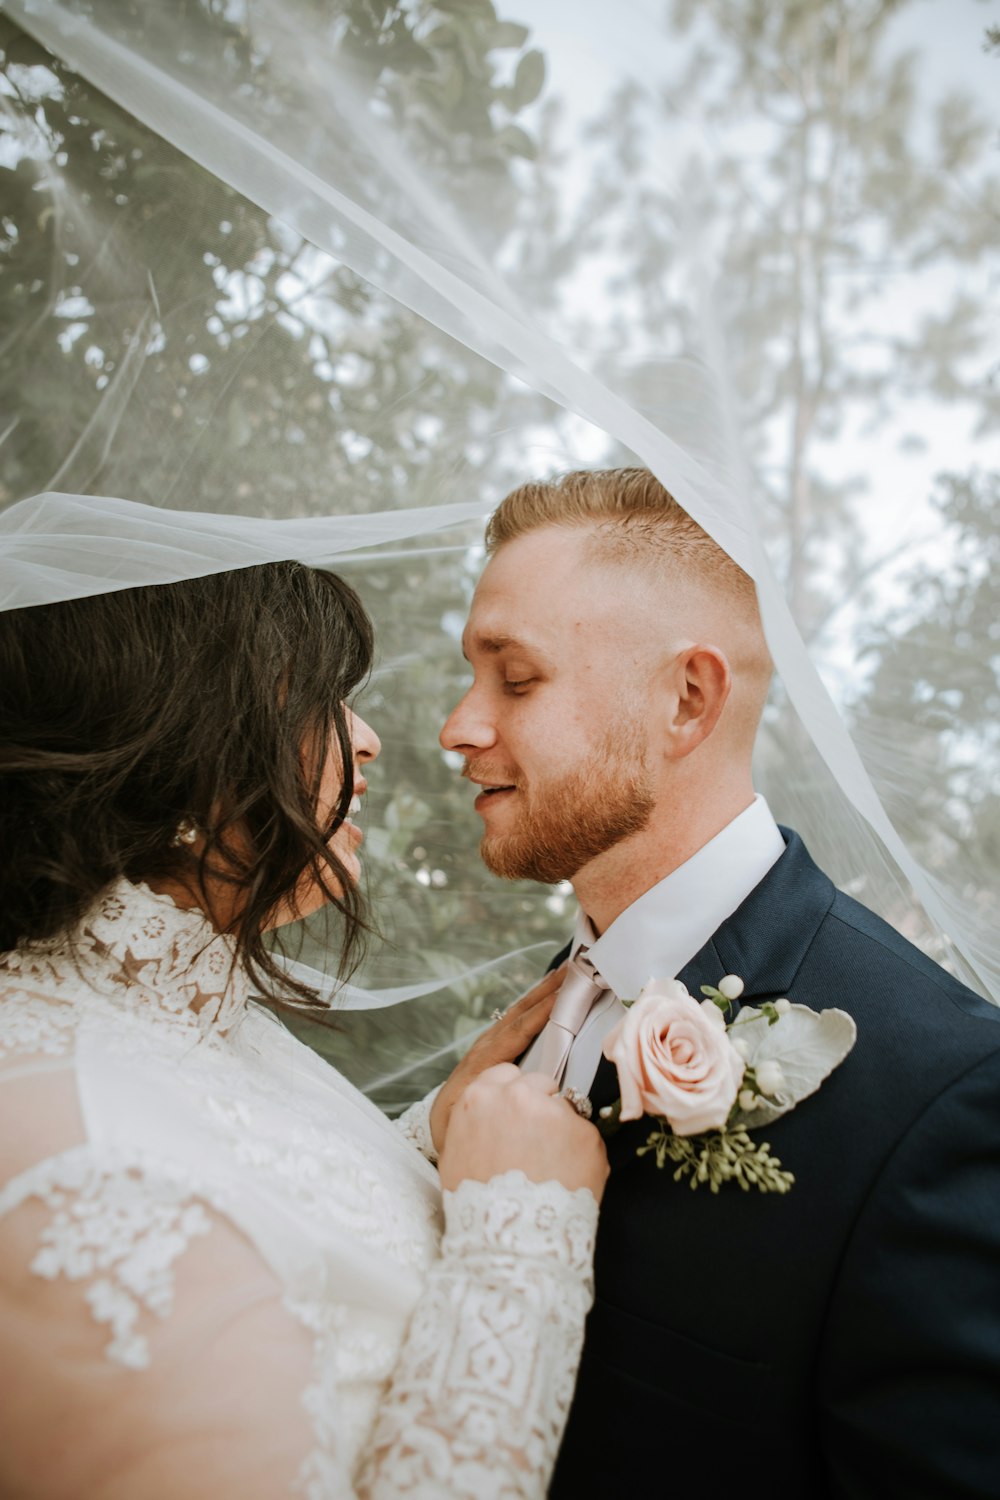 Romantic Wedding Pictures | Download Free Images on Unsplash